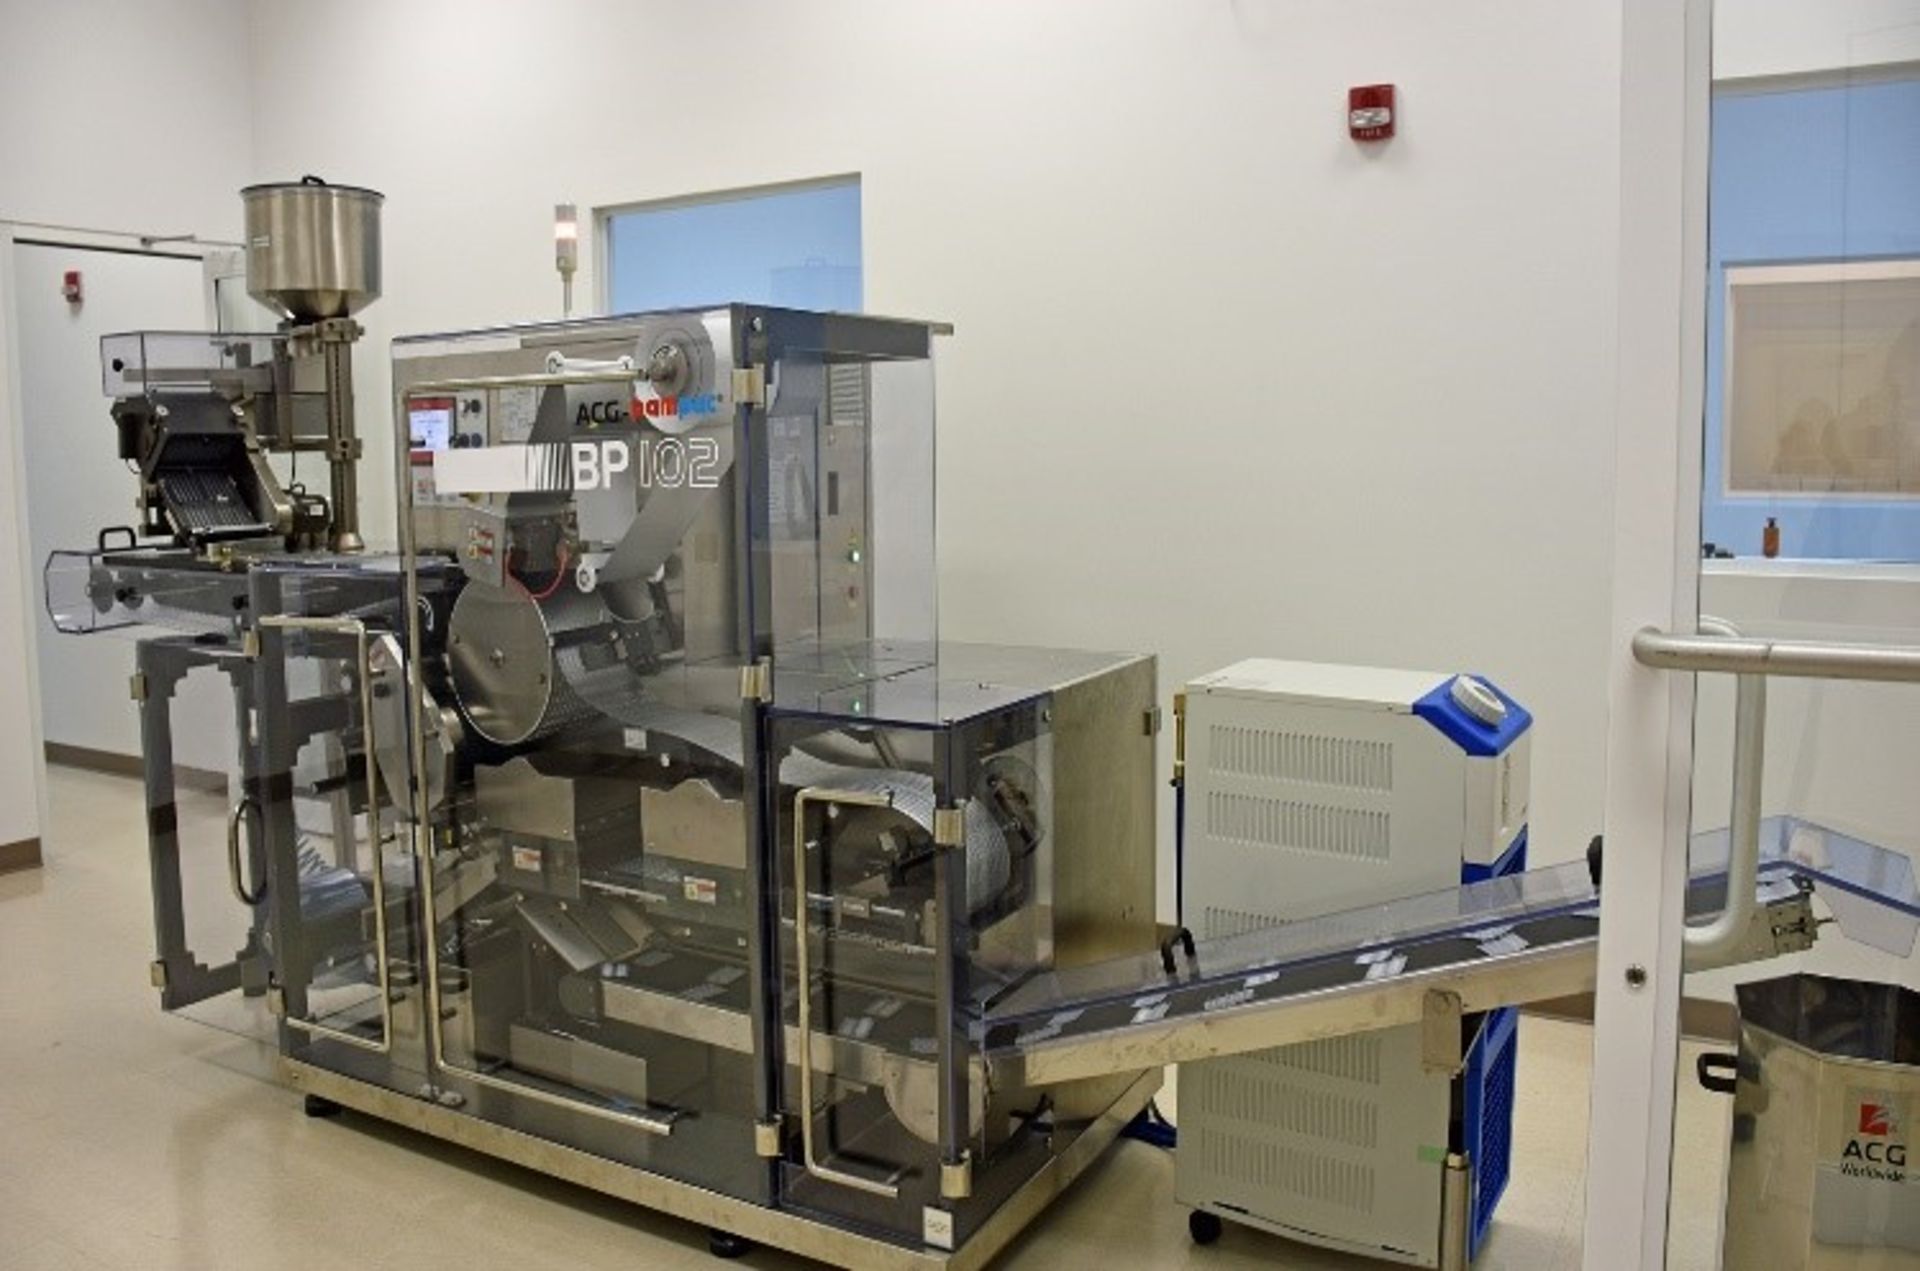 PAM-PAC ACG Rotary Thermoforming Blister Machine Model BP 102 - New in 2016 Unused for Production